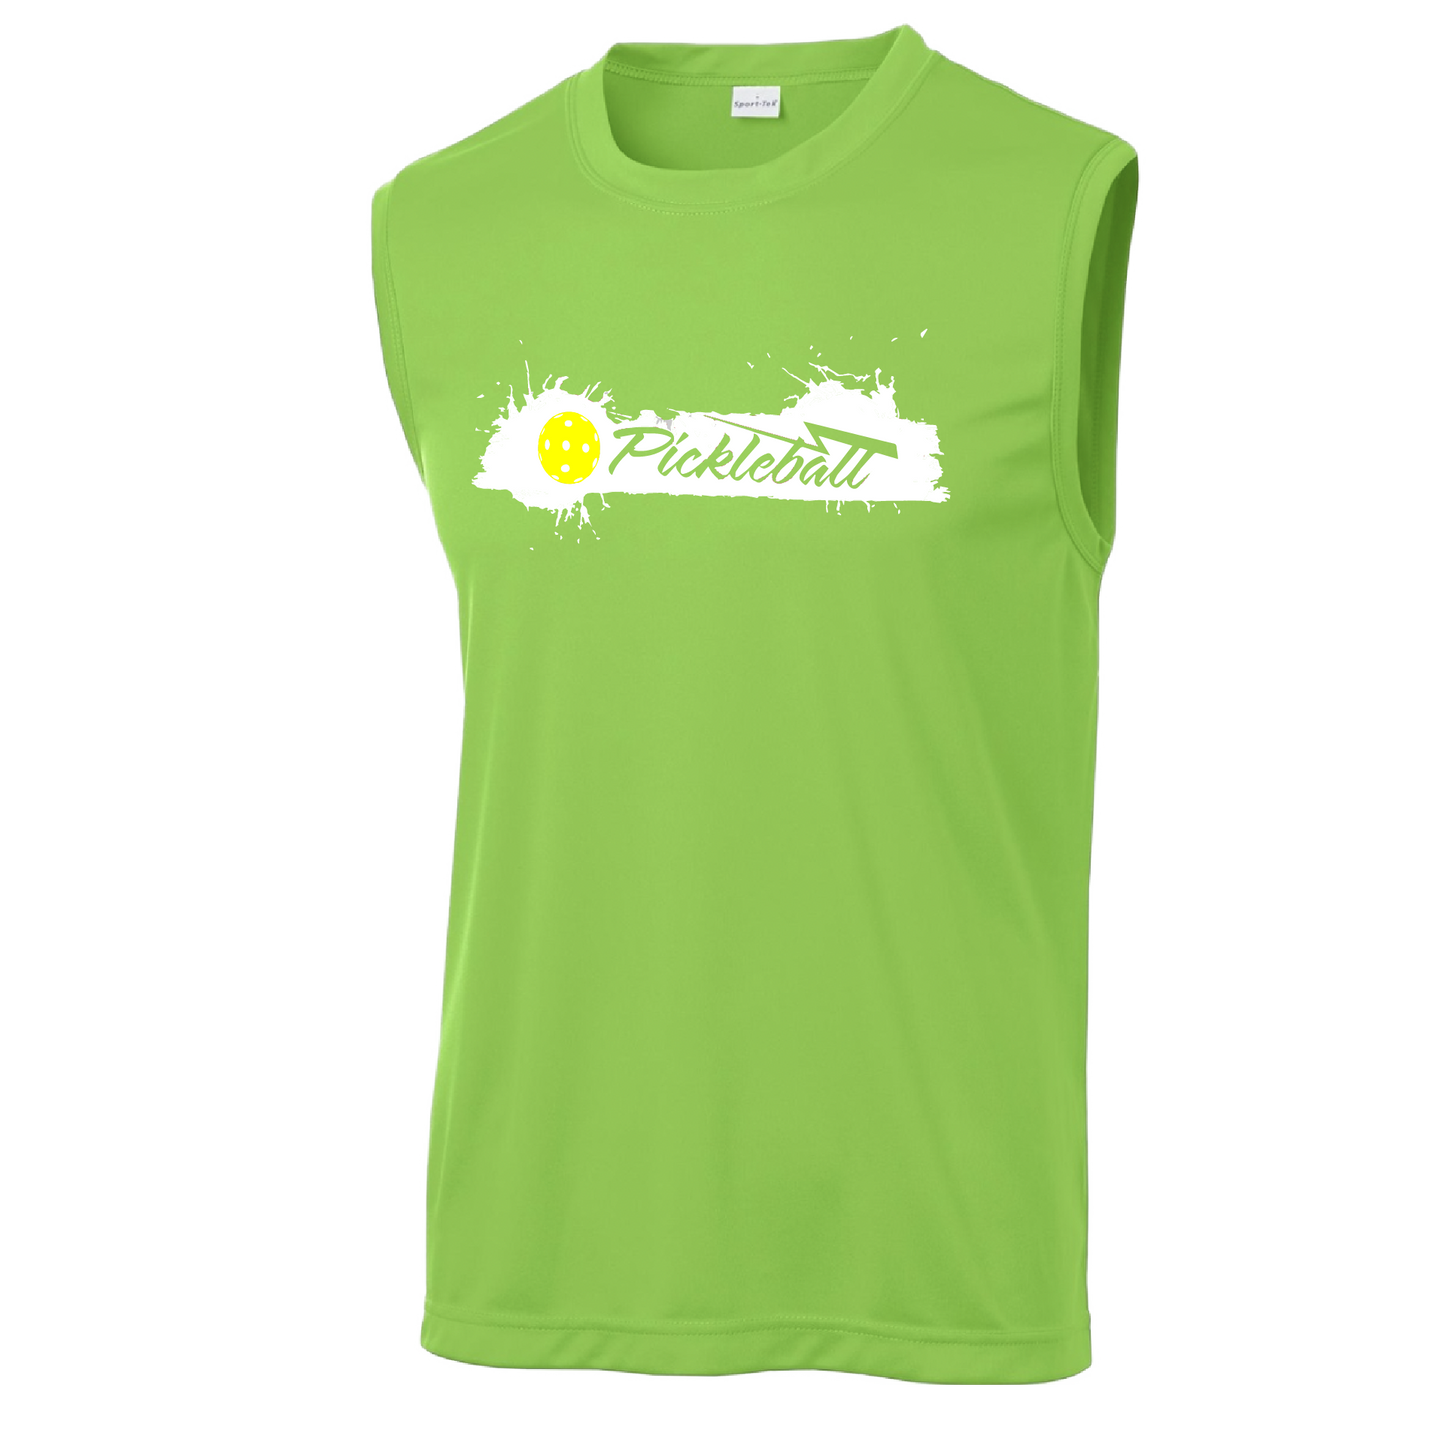 Design: Pickleball Extreme  Men's Style: Sleeveless  Shirts are lightweight, roomy and highly breathable. These moisture-wicking shirts are designed for athletic performance. They feature PosiCharge technology to lock in color and prevent logos from fading. Removable tag and set-in sleeves for comfort.